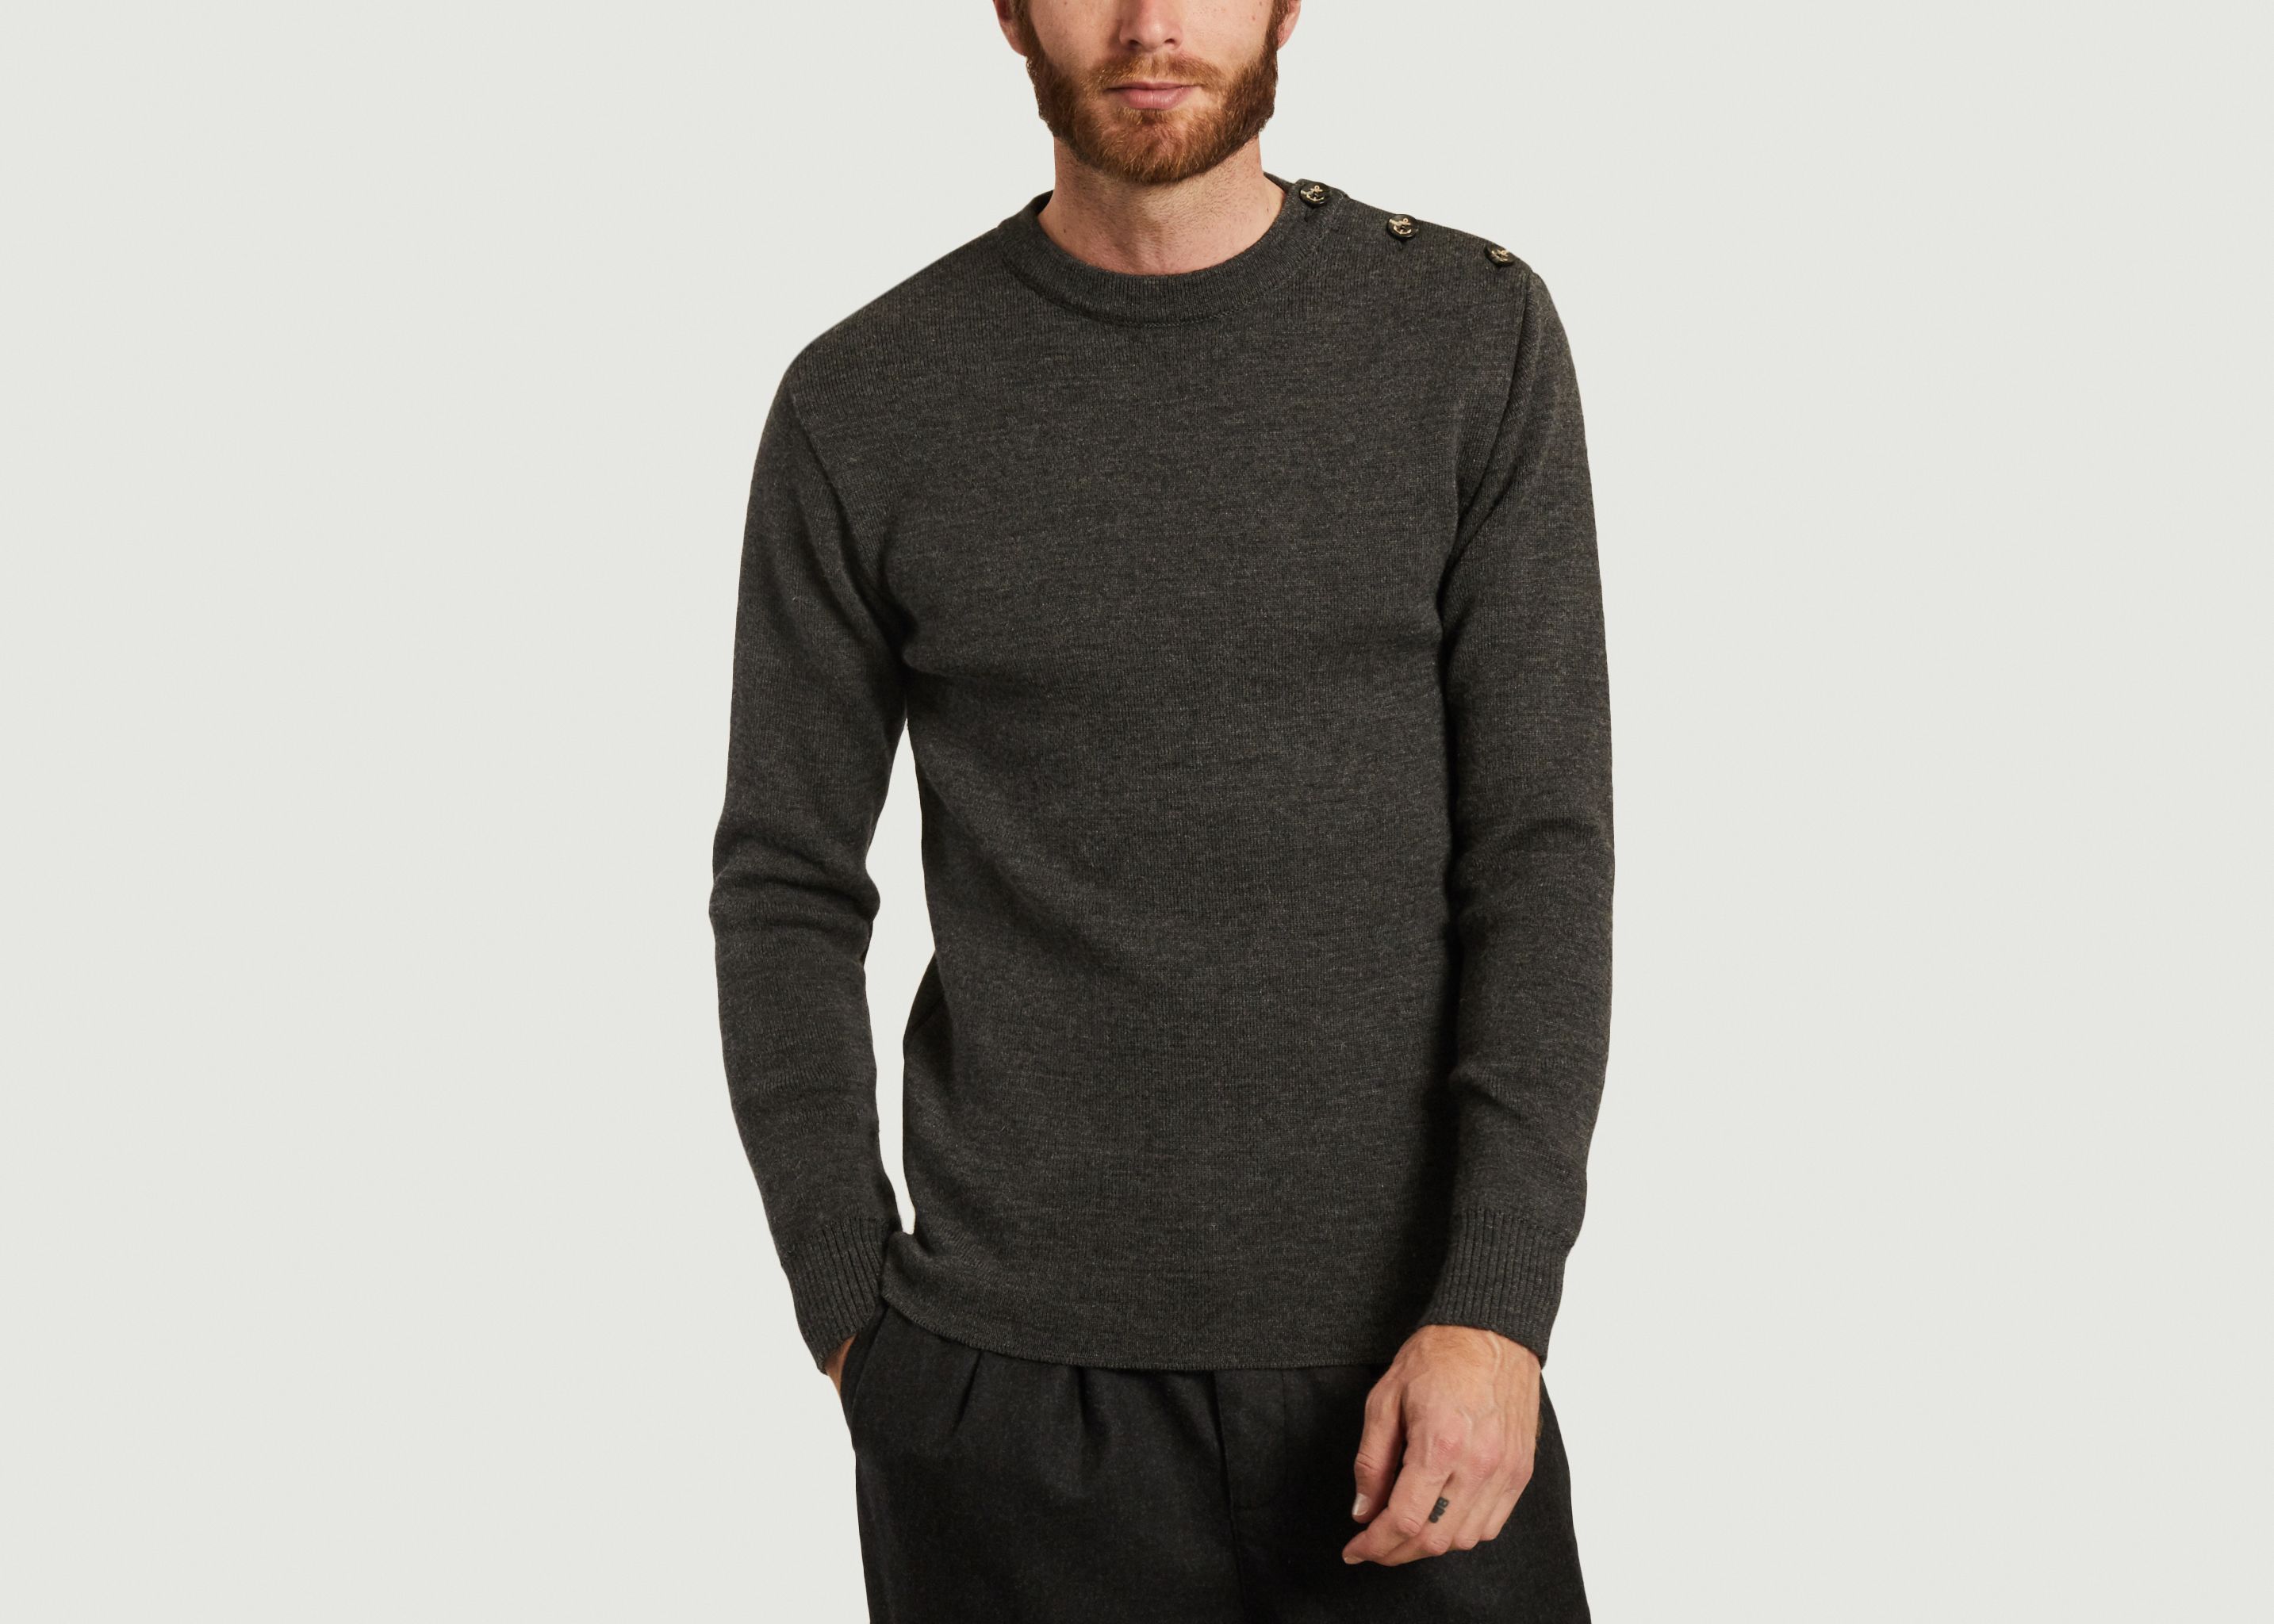 Finistère sweater - Outland